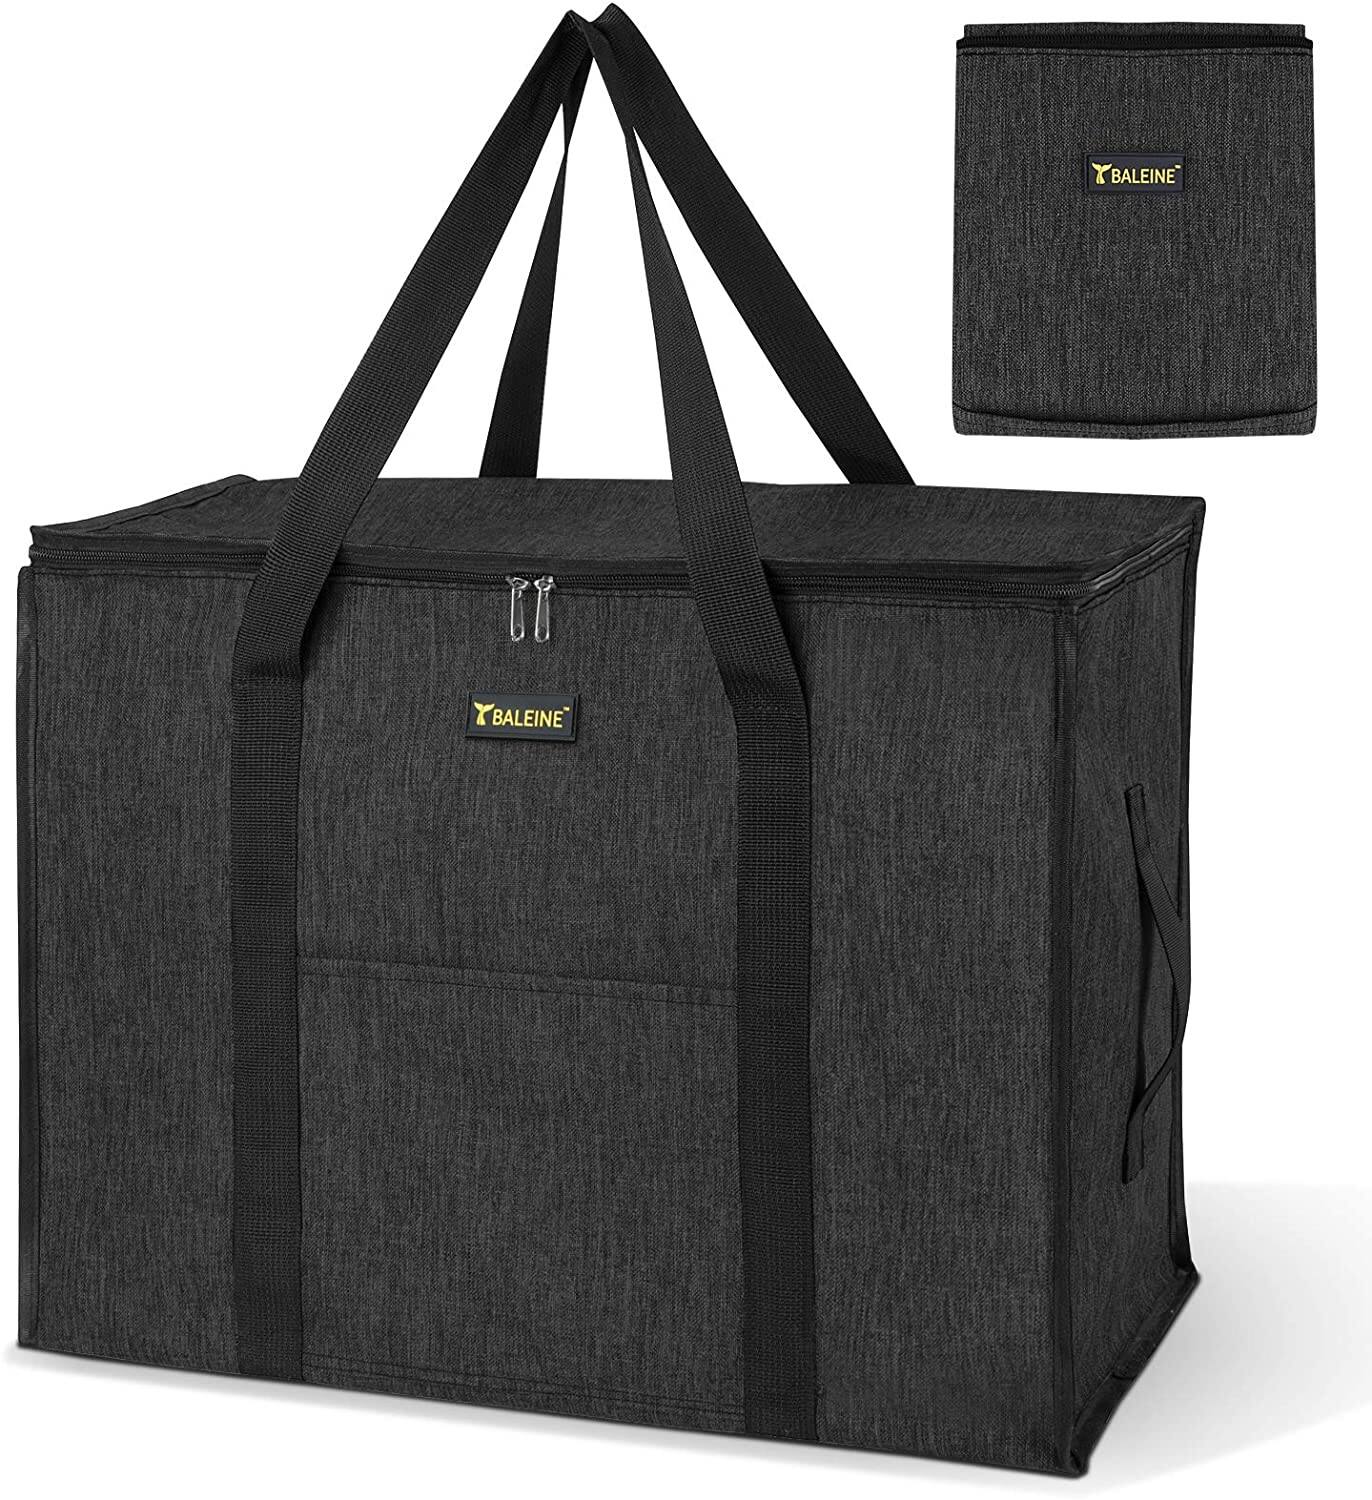 Baleine Storage Tote with Zippers & Carrying Handles for $11.99 + FSSS